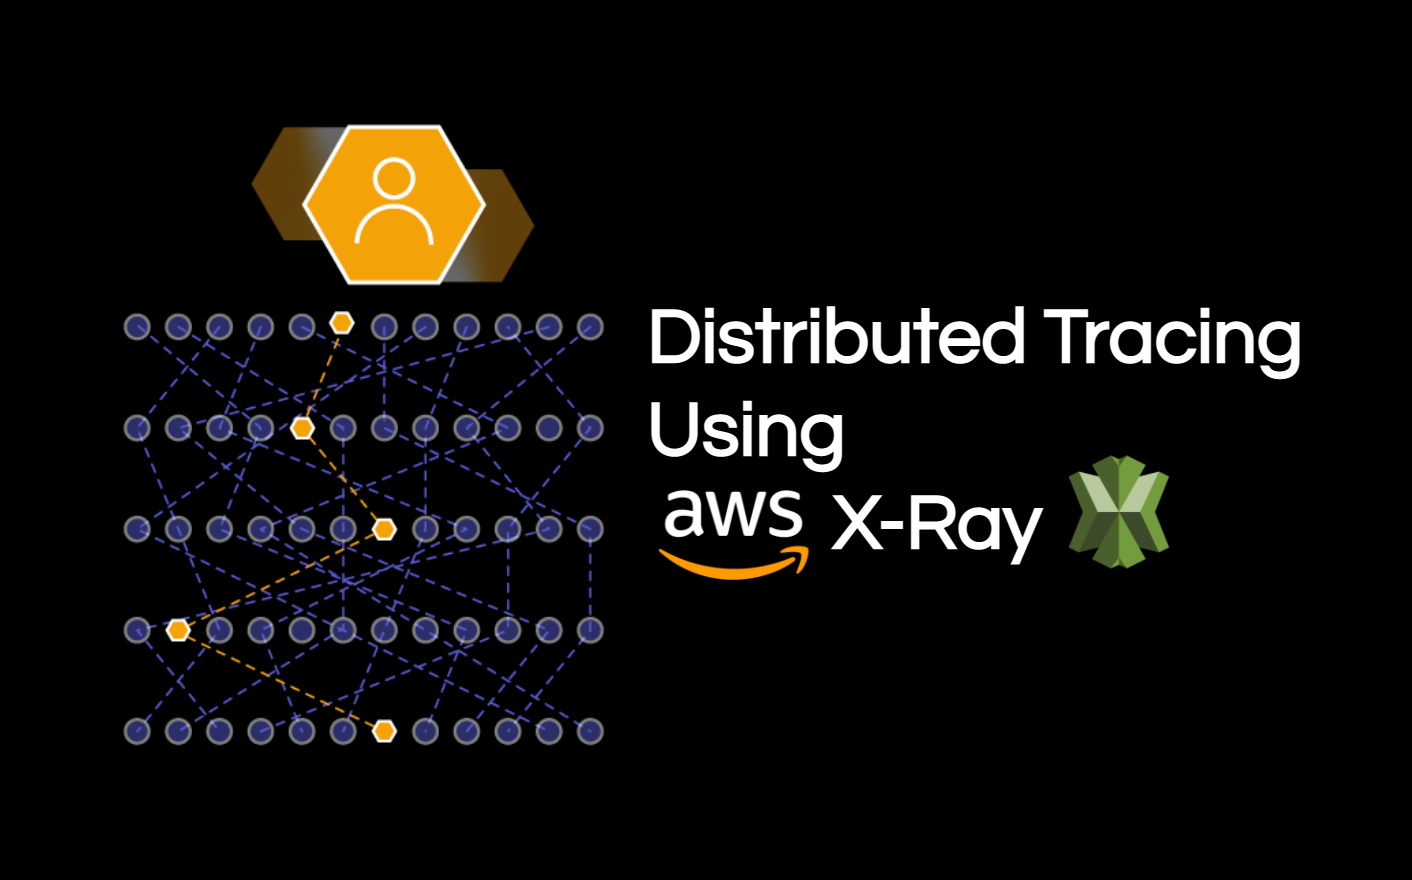 Distributed Tracing using AWS X-Ray